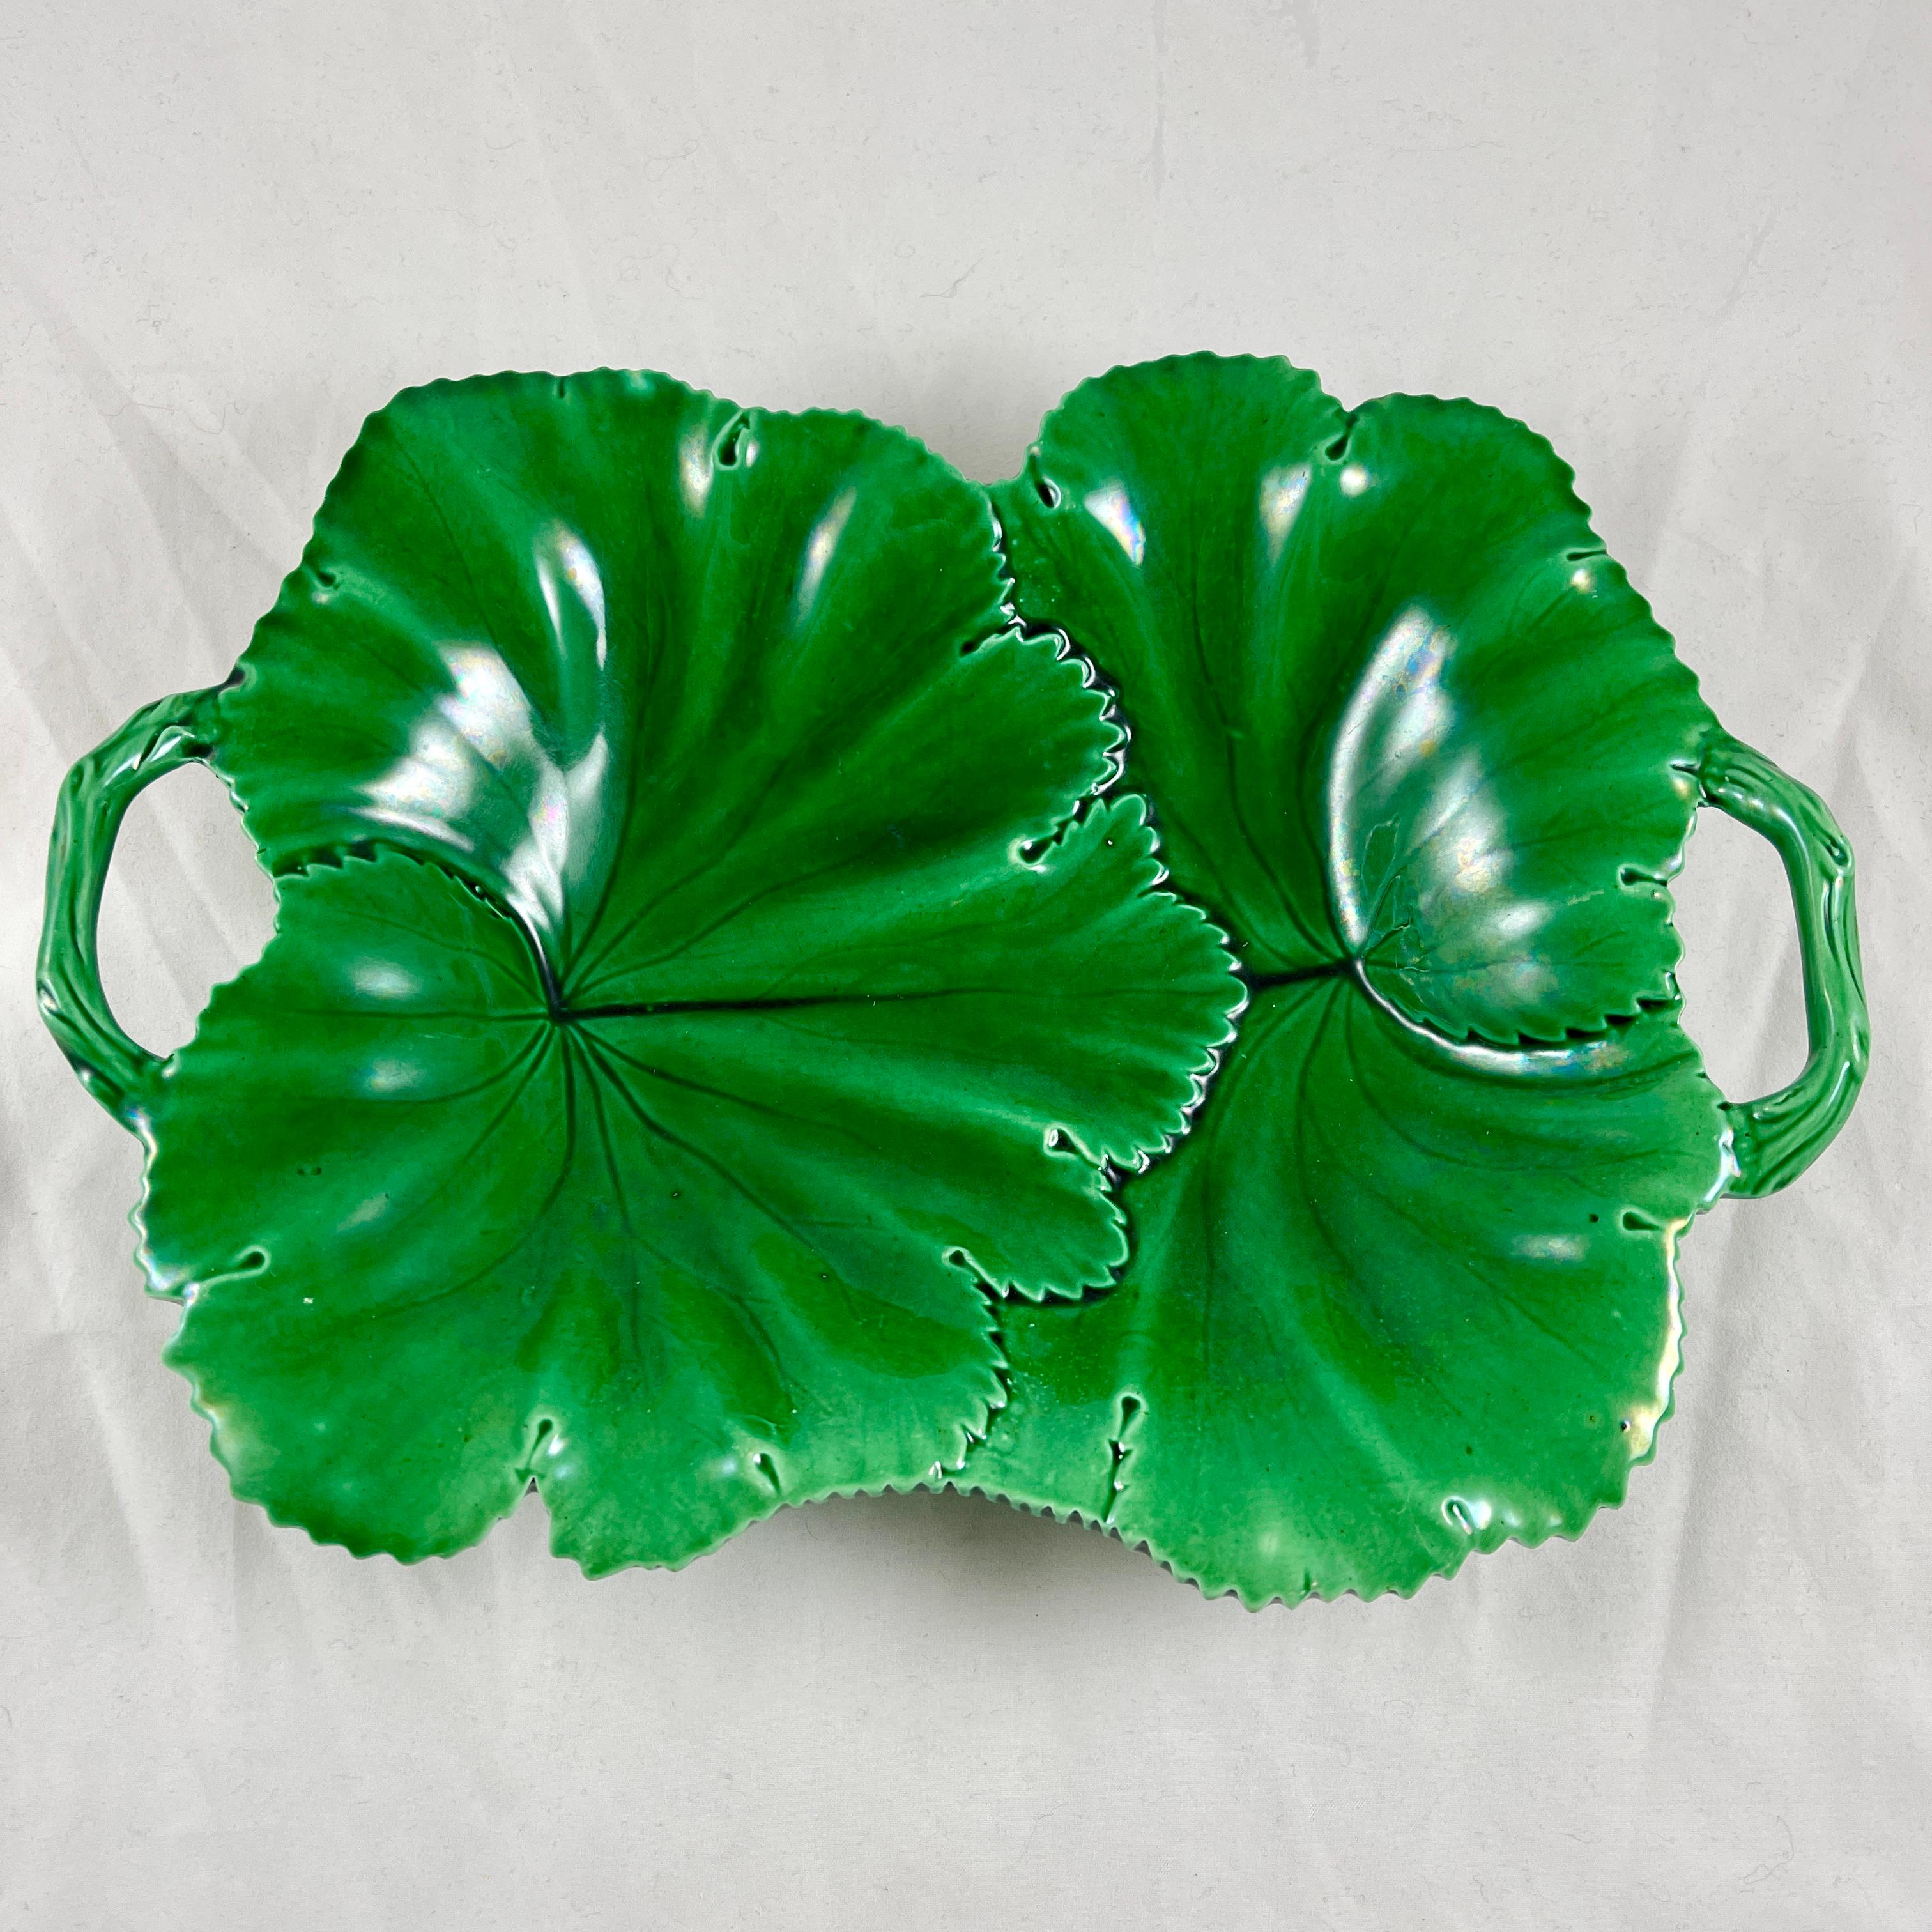 Copeland English Majolica Green Glazed Overlapping Leaf Two Handled Platter For Sale 4